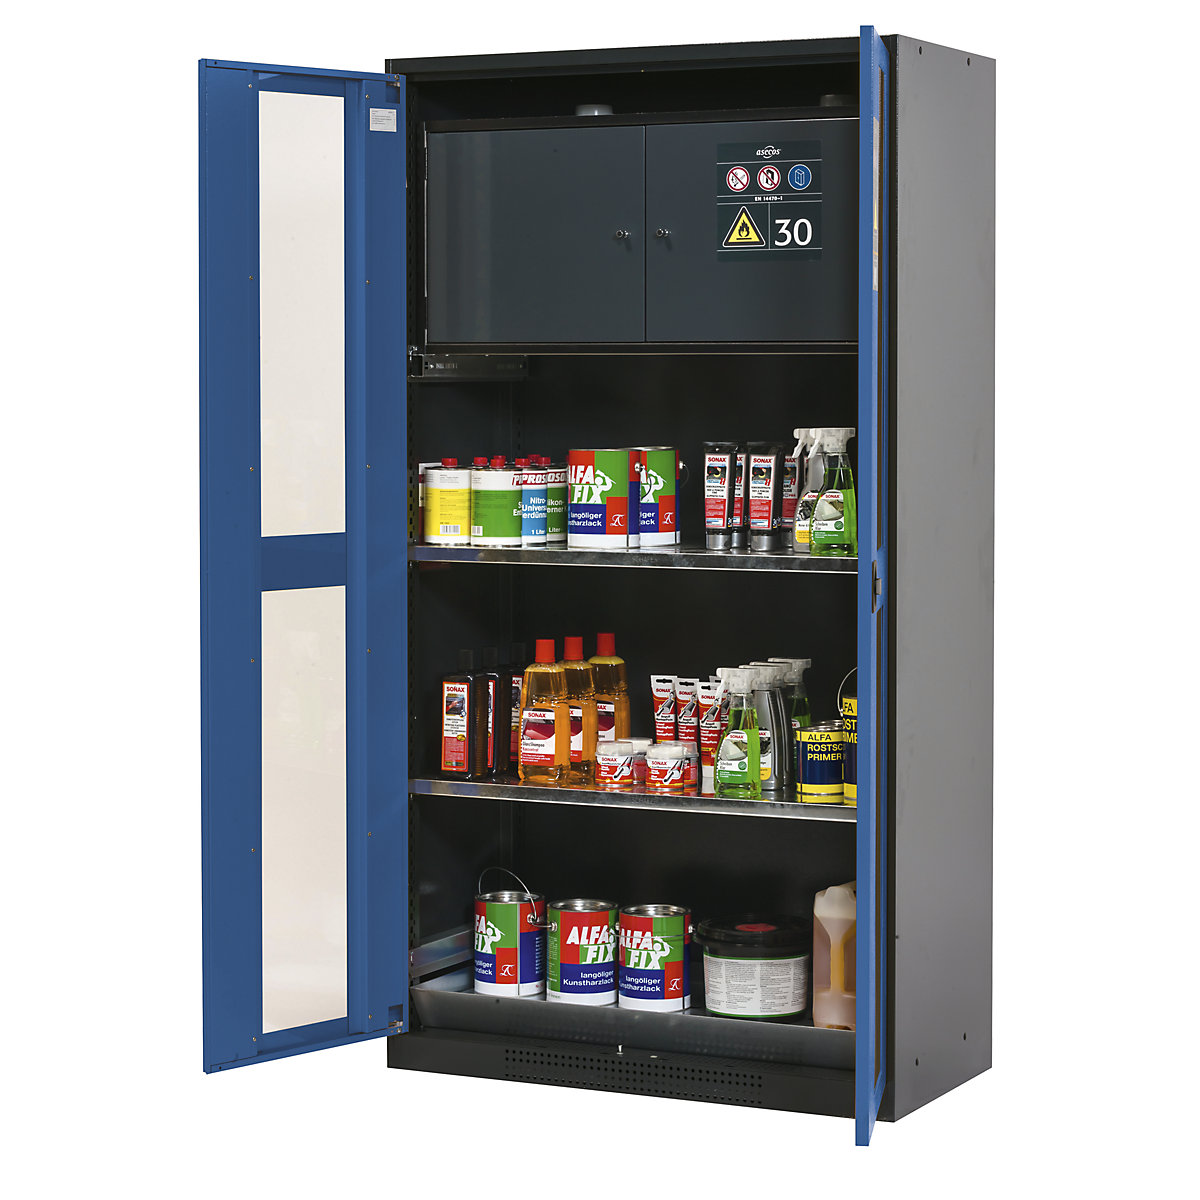 Chemical storage cupboard – asecos, door with vision panels, with type 30 hazardous goods storage box, gentian blue-2